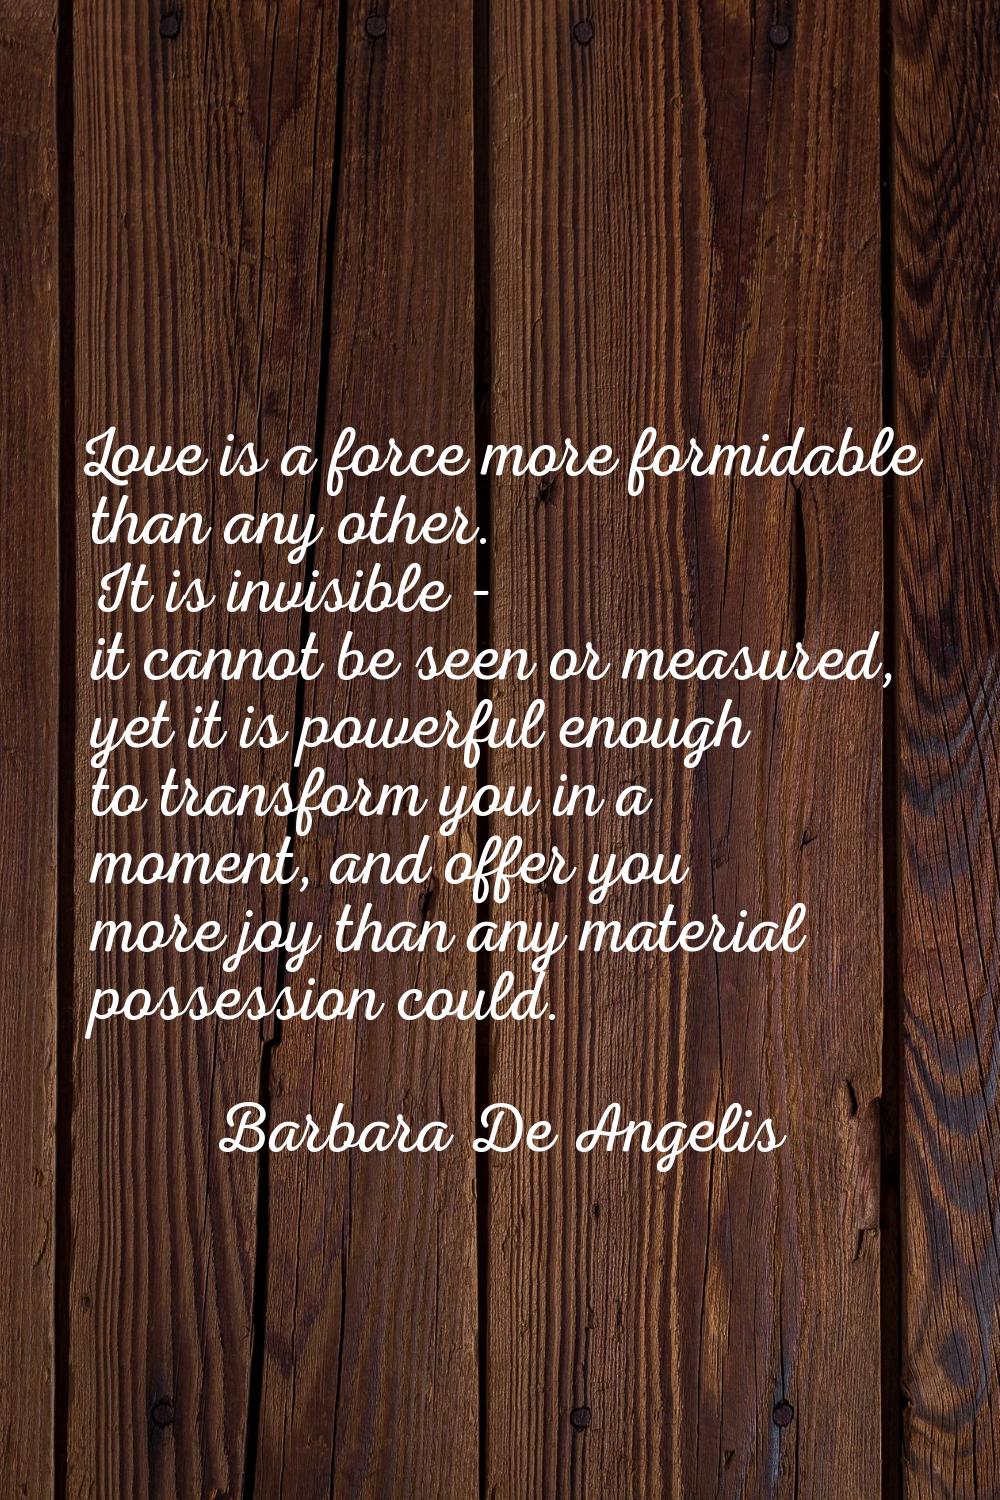 Love is a force more formidable than any other. It is invisible - it cannot be seen or measured, ye